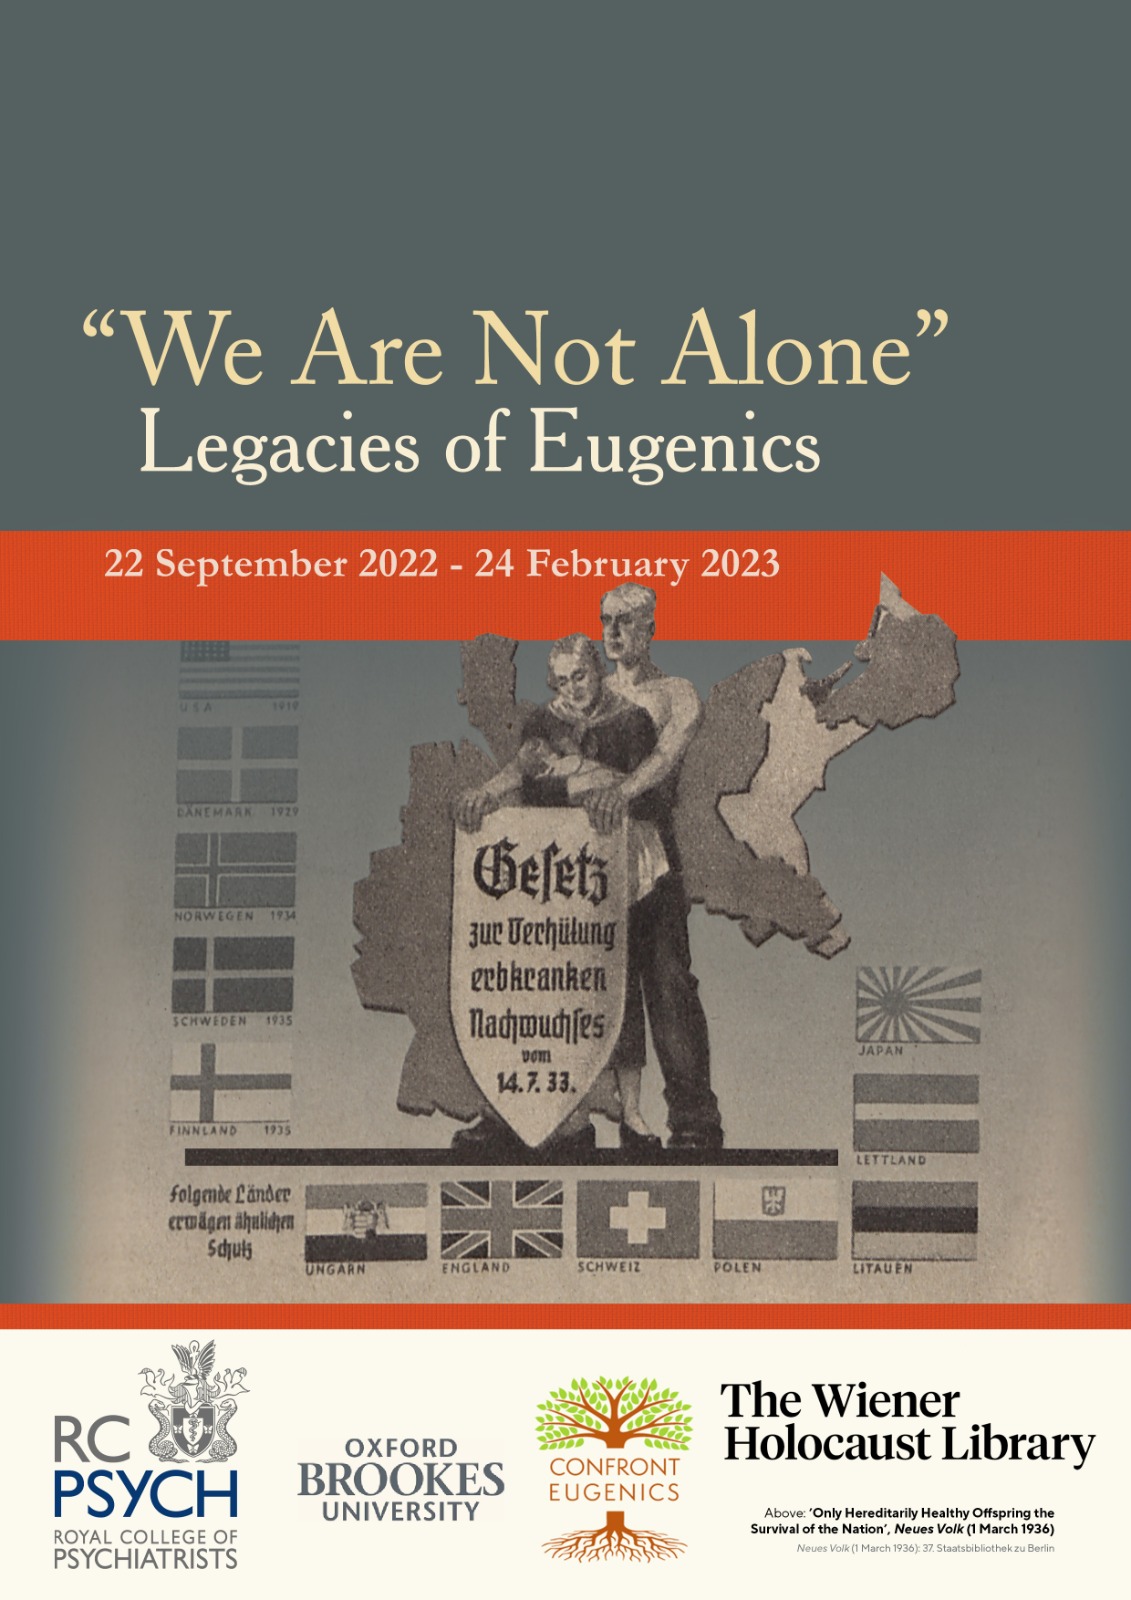 We are not alone: Legacies of Eugenics exhibition flyer